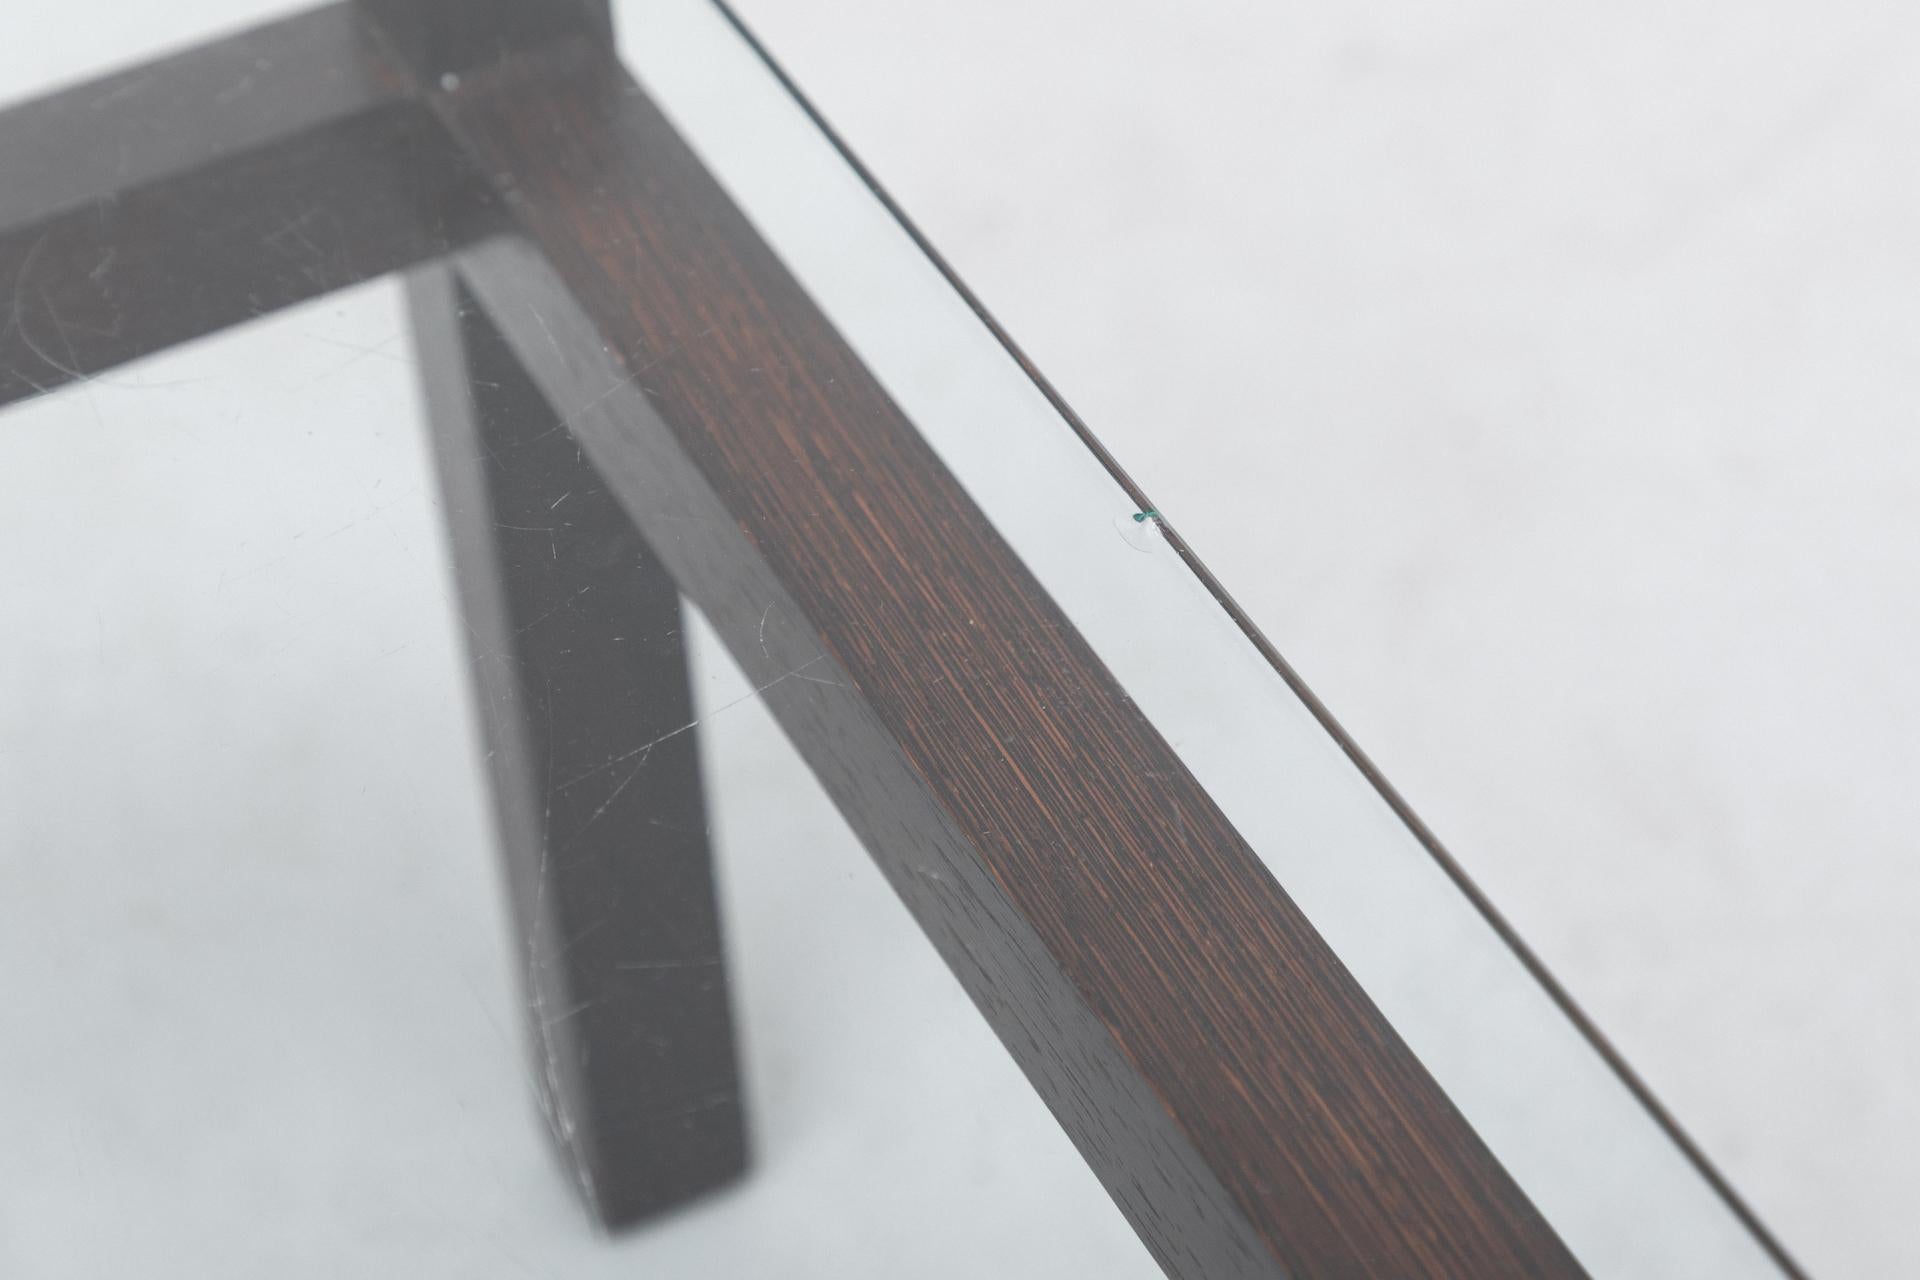 Mid-20th Century 'Langerak' Wenge Wood and Glass Coffee Table by Kho Liang Ie for 'T Spectrum